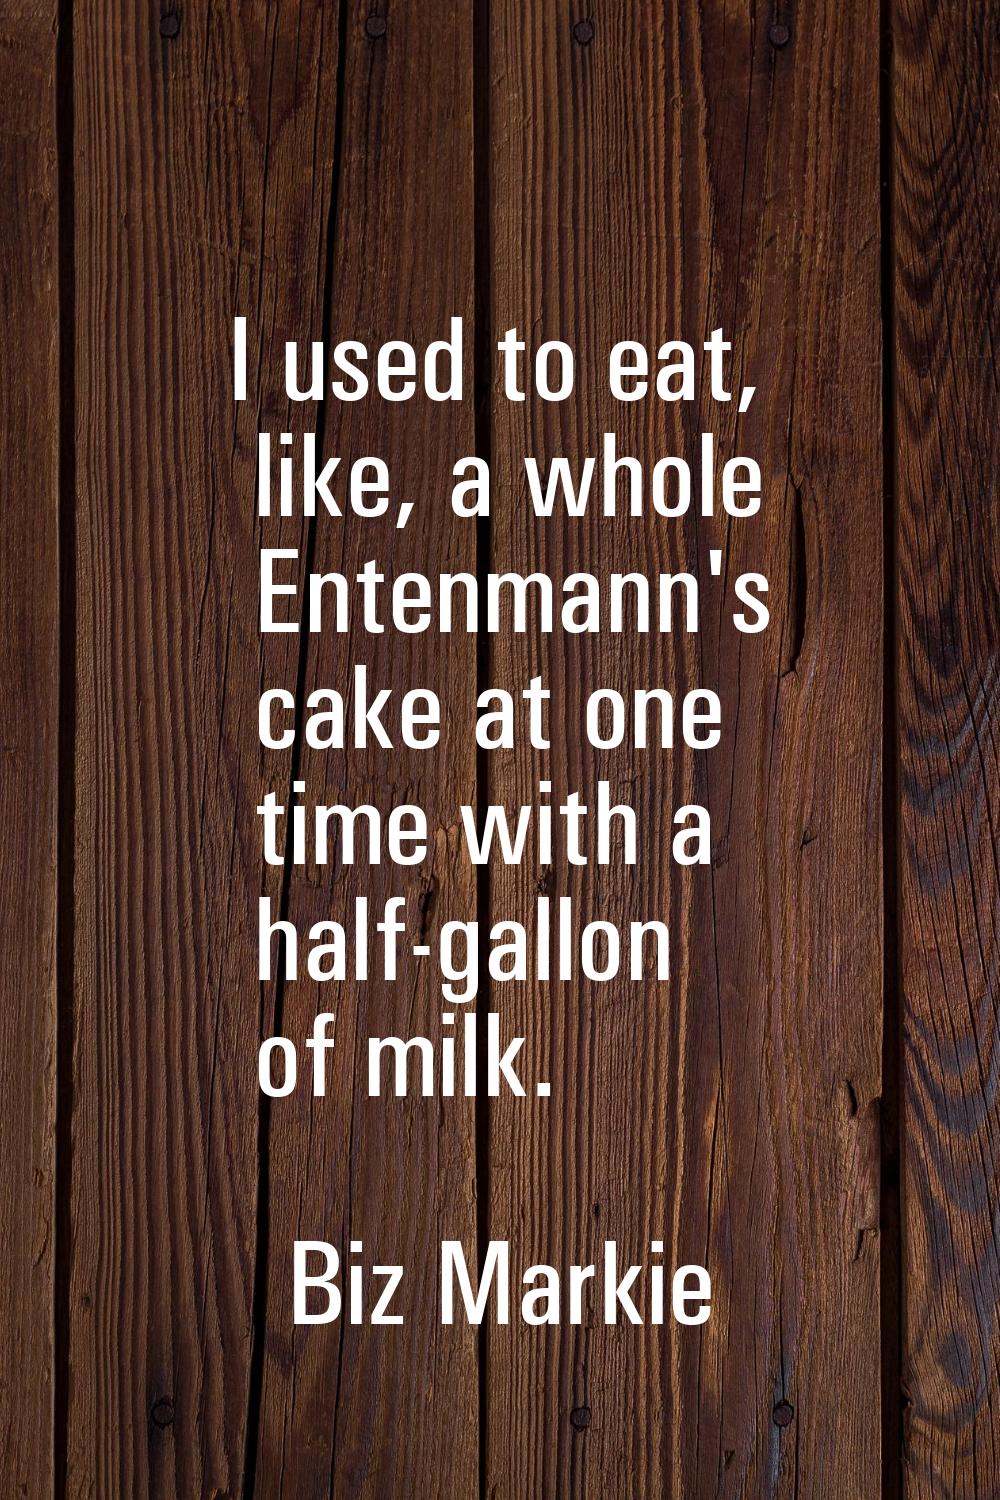 I used to eat, like, a whole Entenmann's cake at one time with a half-gallon of milk.